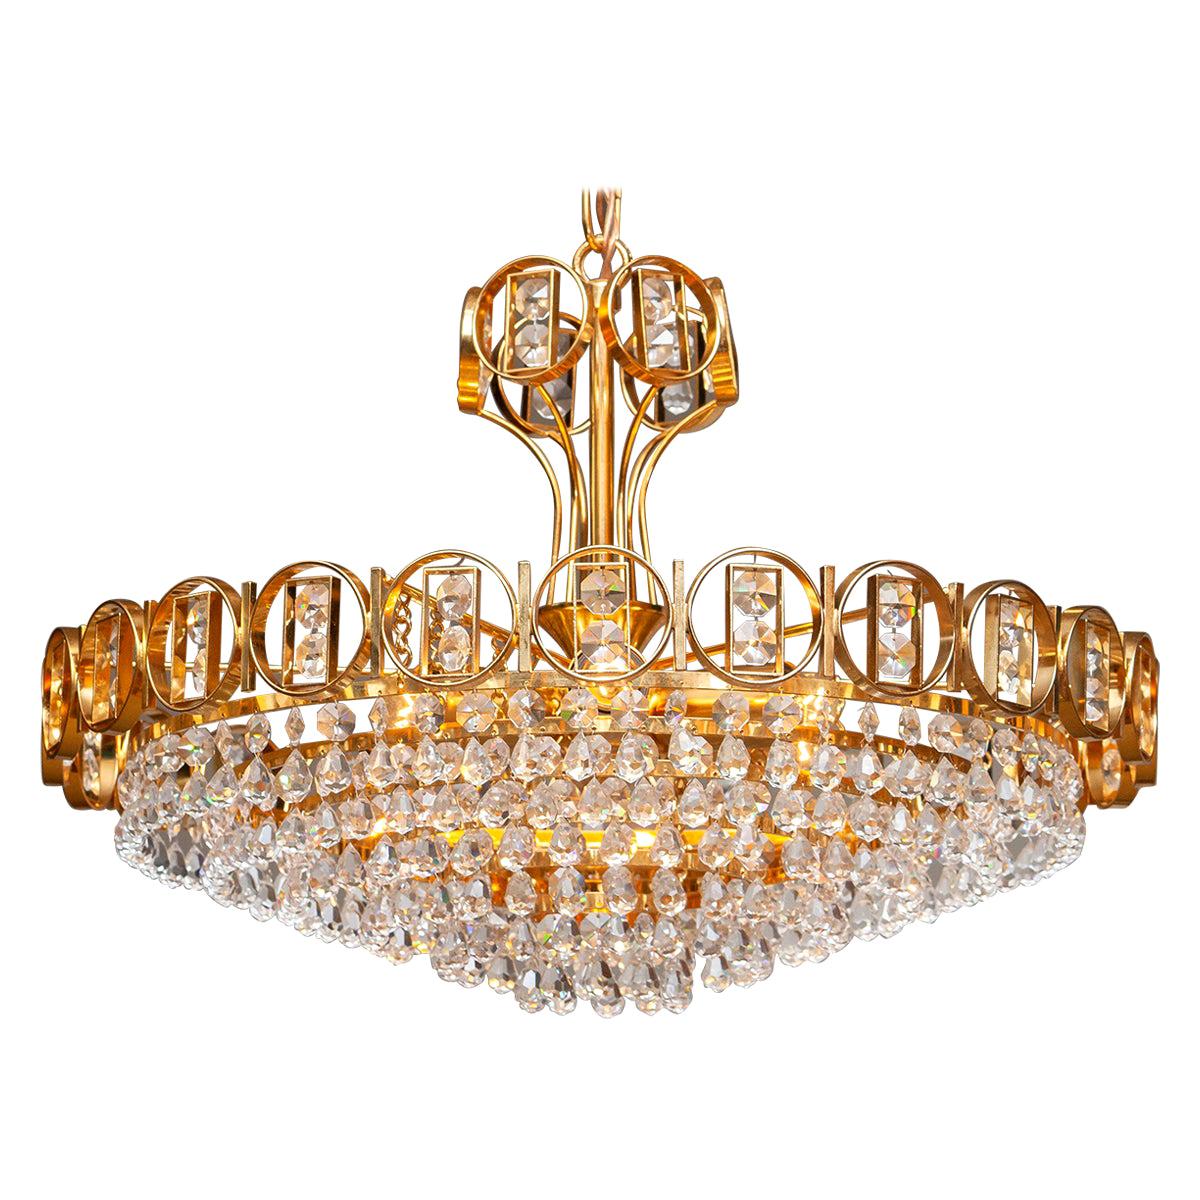 Mid-Century Modern 1970s, Gold-Plated Brass Chandelier with Faceted Crystals Made by Palwa, Germany